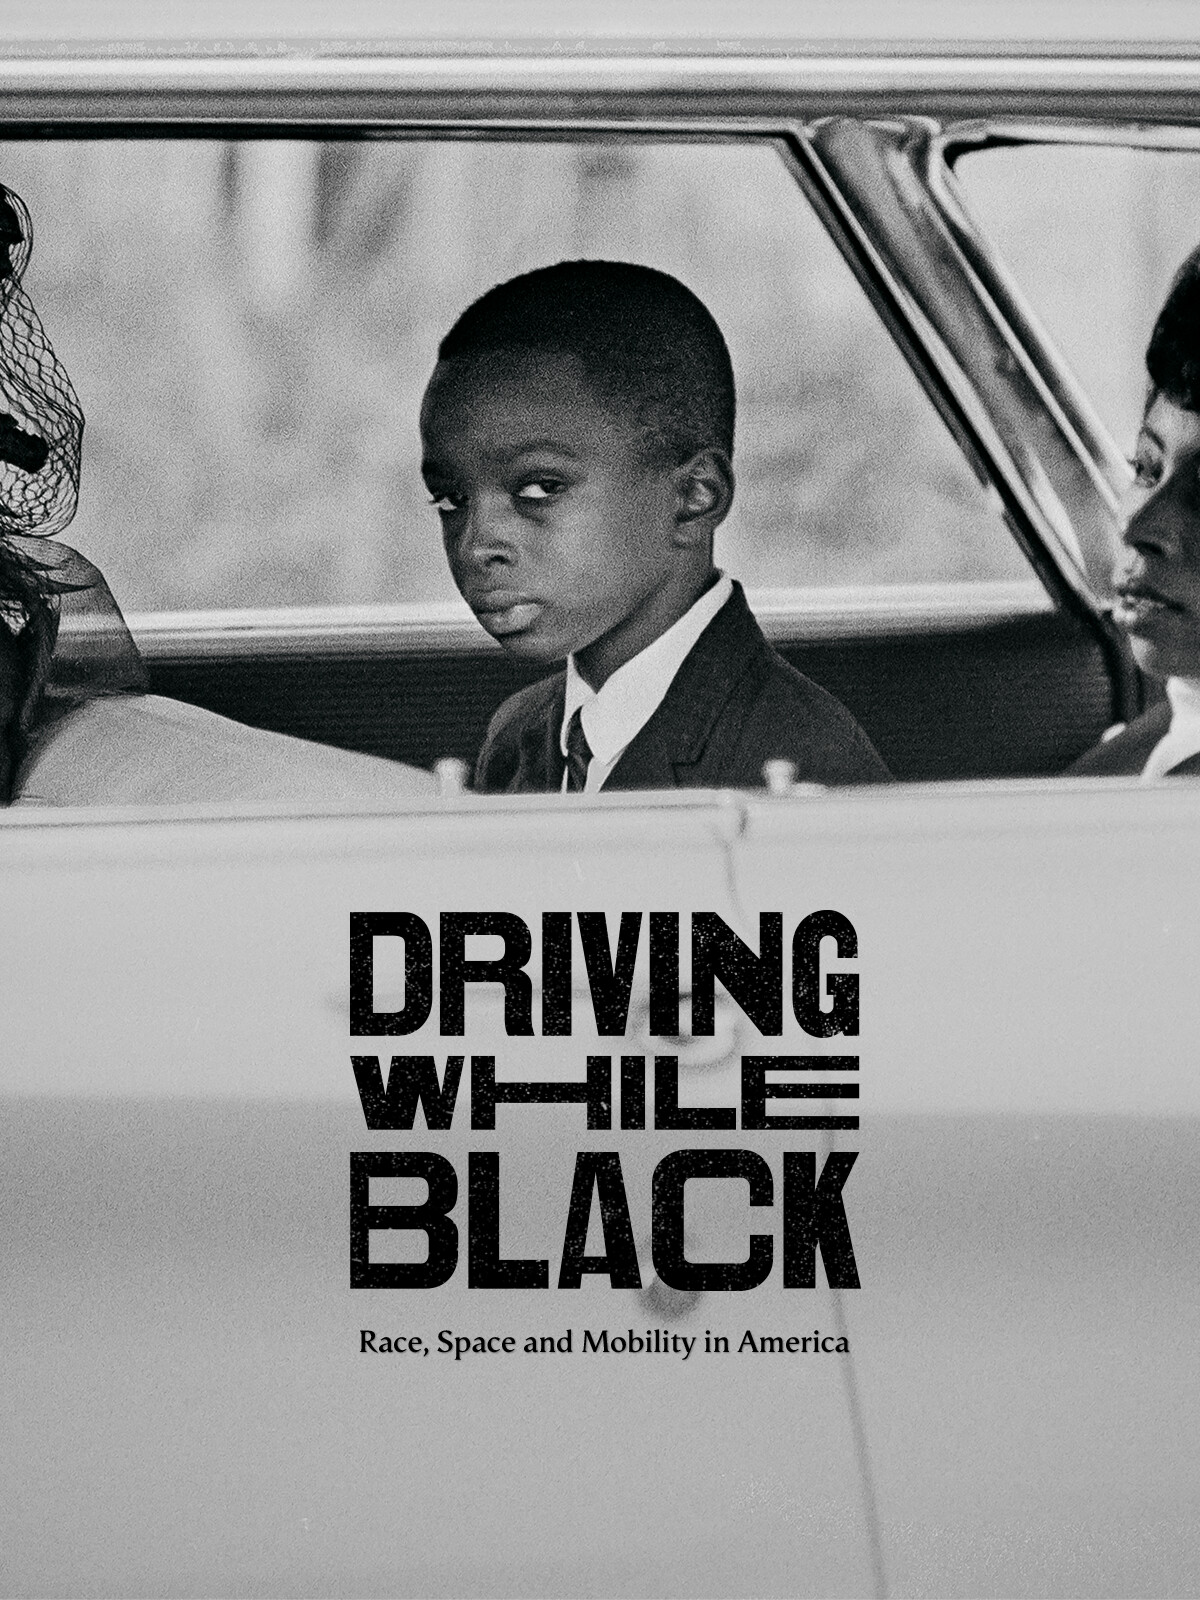 cover image of the documentary Driving While Black